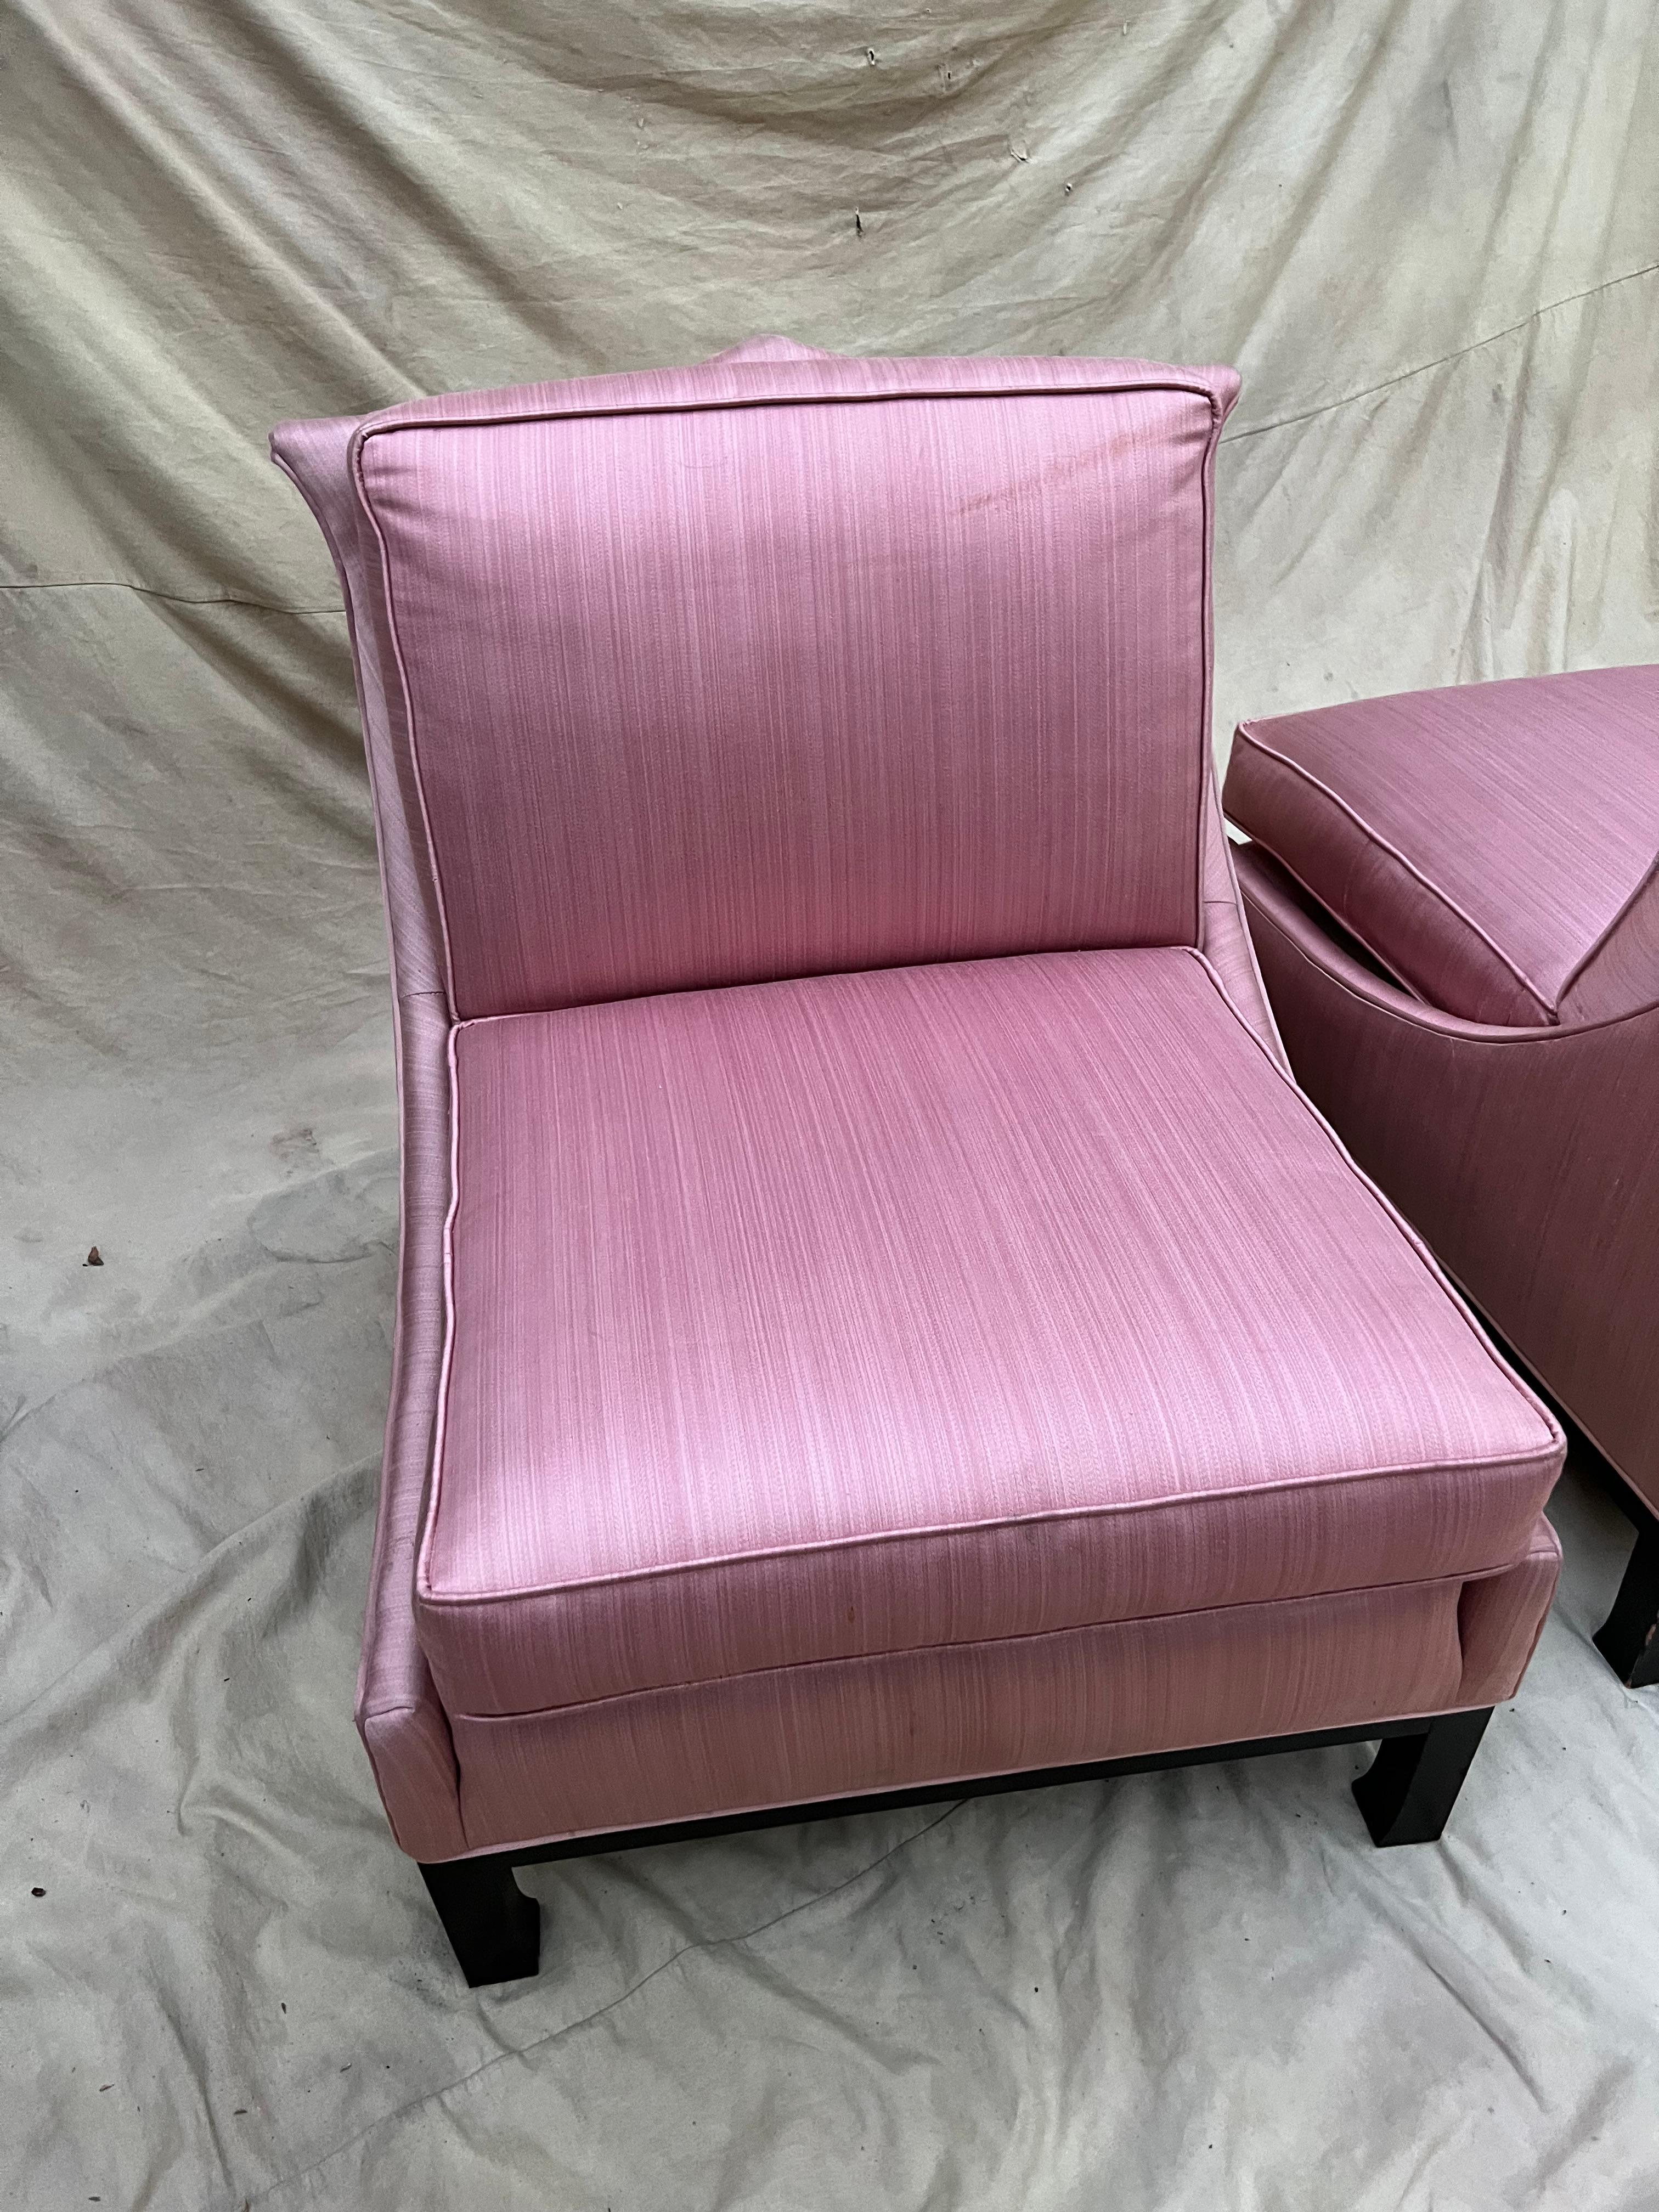 Pair of hollywood regency slipper chairs. The chairs have been upholstered in a striated pink with some sheen to it. A complement to any sitting room or bedroom.